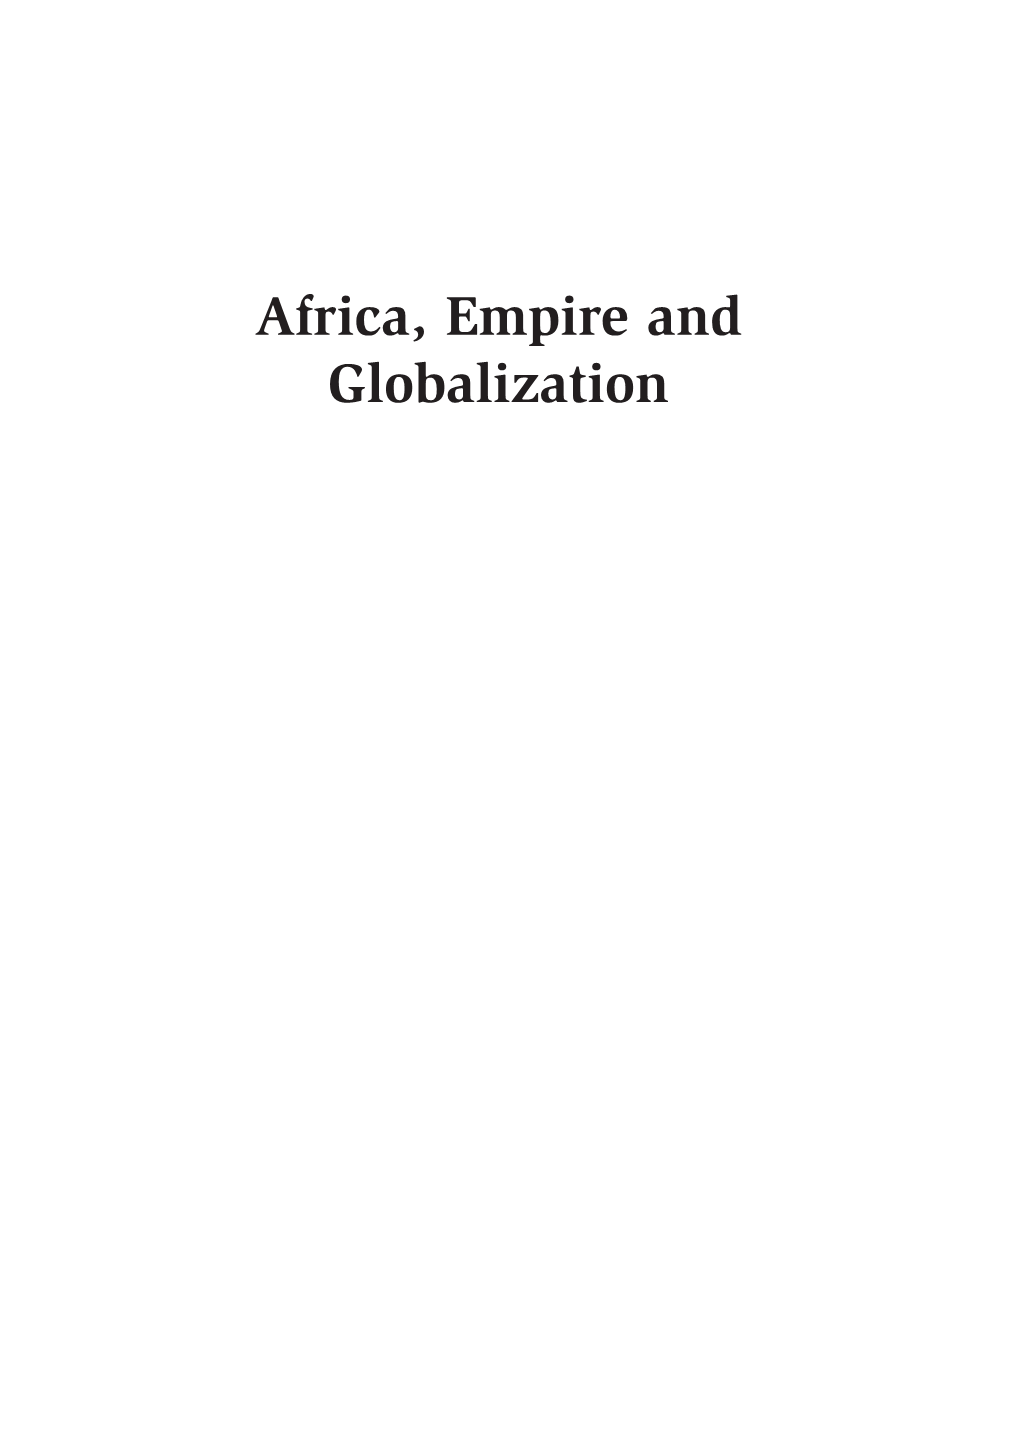 Africa, Empire and Globalization 00 Falola Brownell Fmt 1/24/11 12:53 PM Page Ii